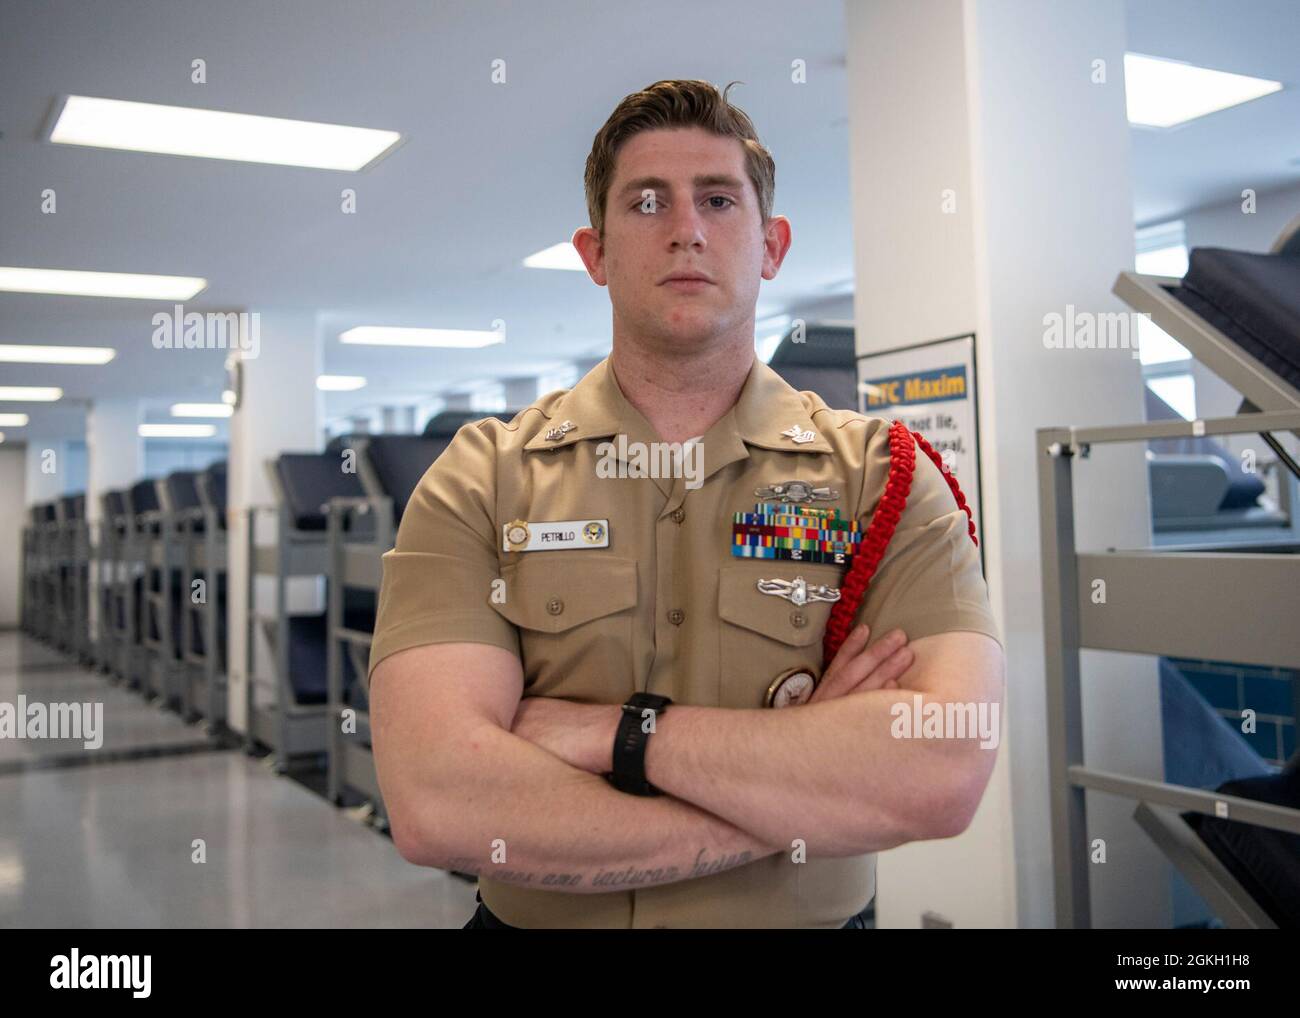 Information Systems Technician 1st Class Dan Petrillo, a recruit division commander, poses for a portrait inside the USS Marvin Shields recruit barracks at Recruit Training Command. More than 40,000 recruits train annually at the Navy's only boot camp. Stock Photo